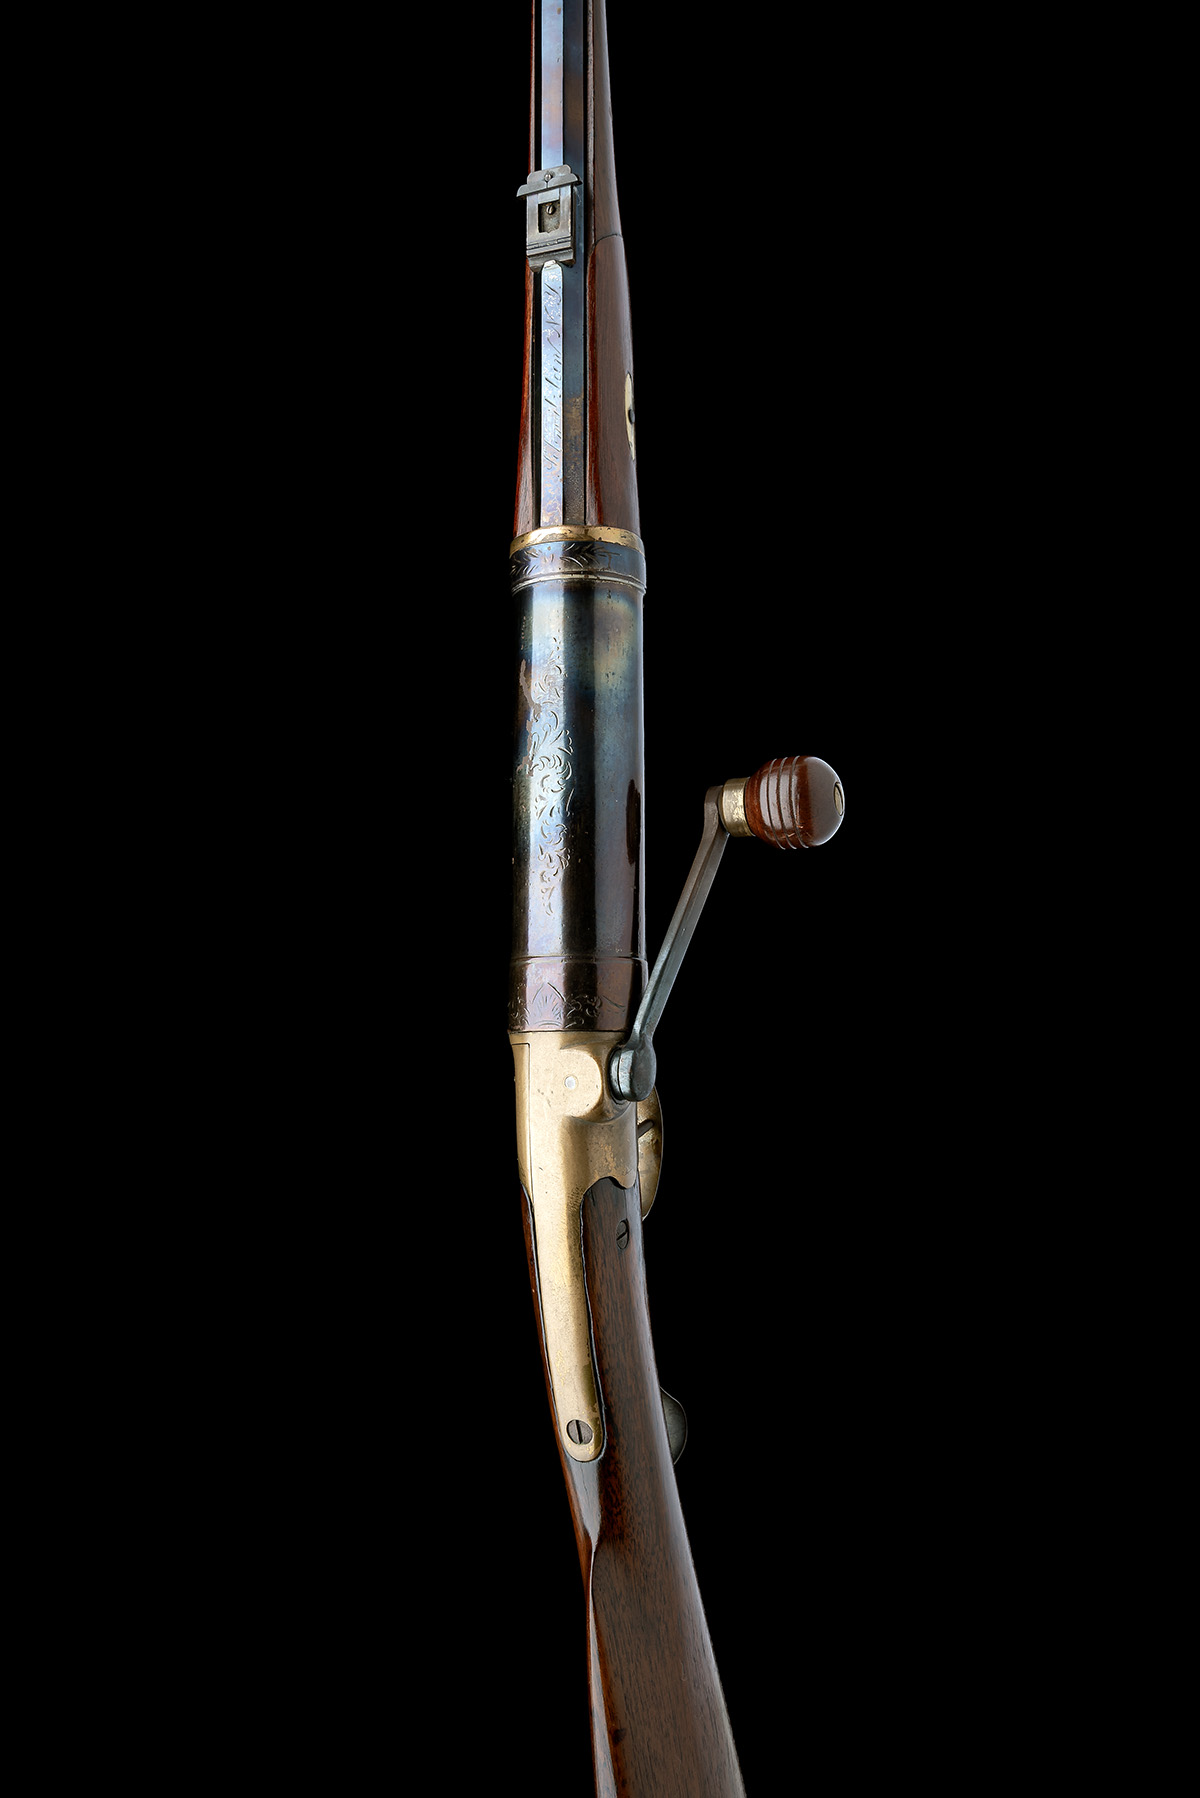 A RARE 8mm CRANK-WOUND AMERICAN 'PRIMARY NEW YORK TYPE' GALLERY AIR-RIFLE, POSSIBLY BY D. & J. - Image 4 of 8